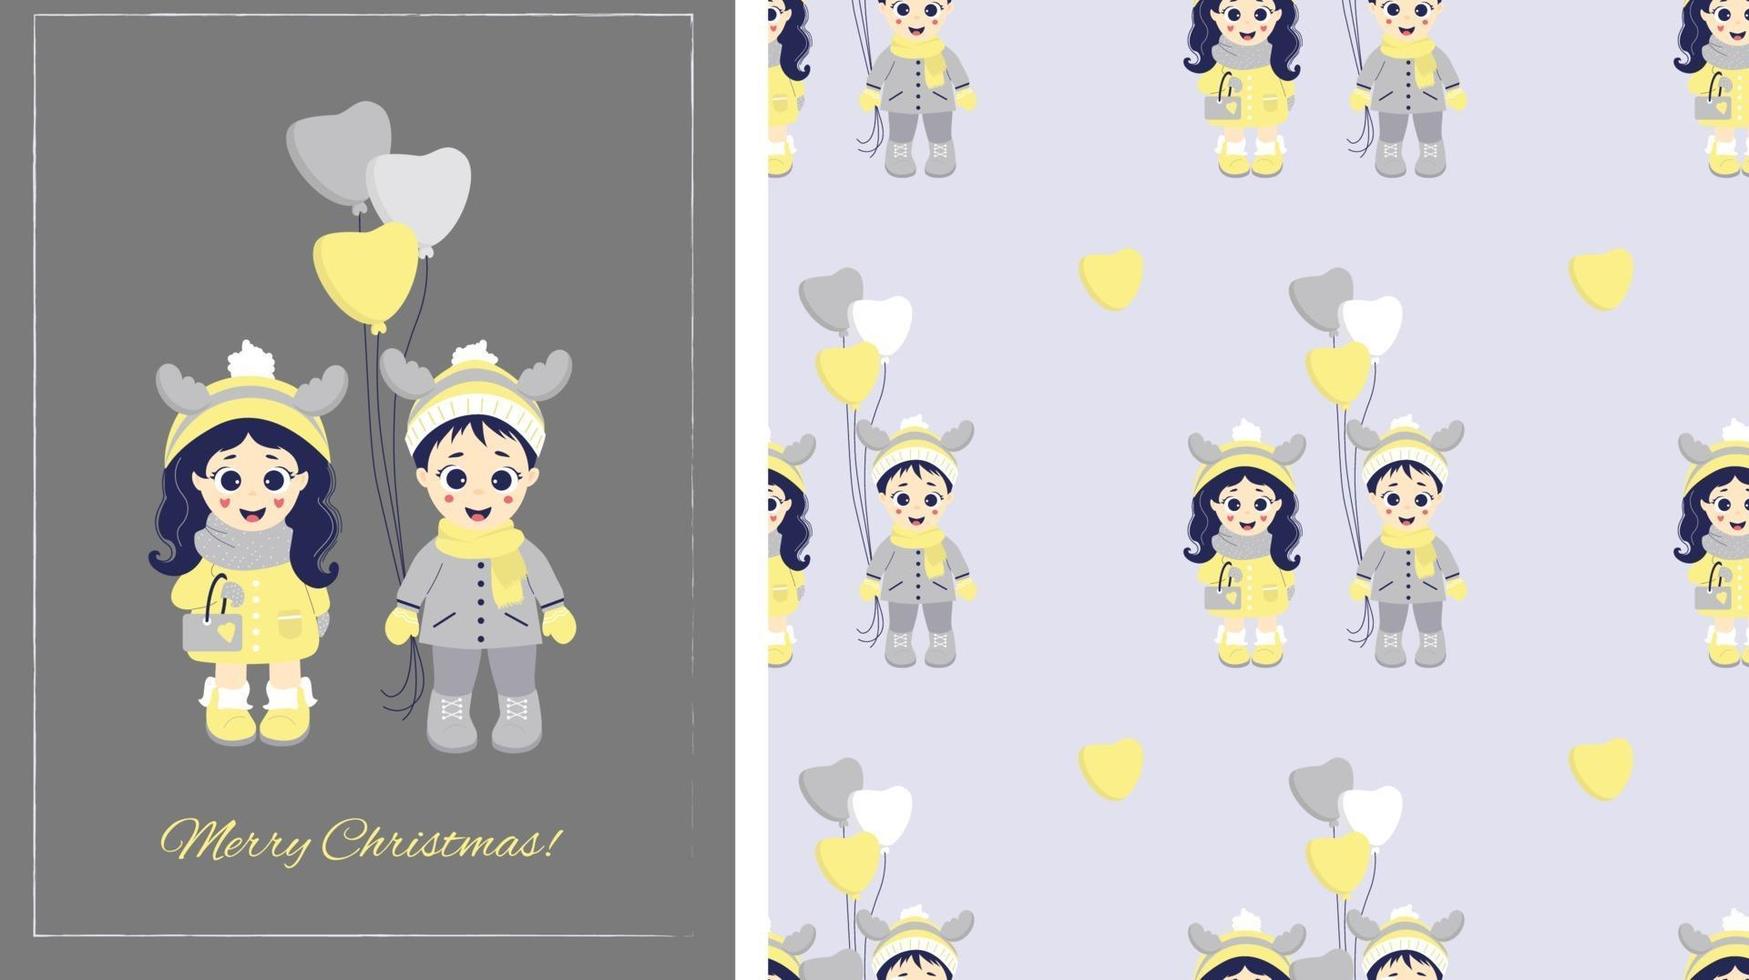 Kids winter. Seamless patterns and greeting card Merry Christmas. Couple - a boy and a girl with deer antlers on their heads and with balloons in winter clothes on gray background. Vector